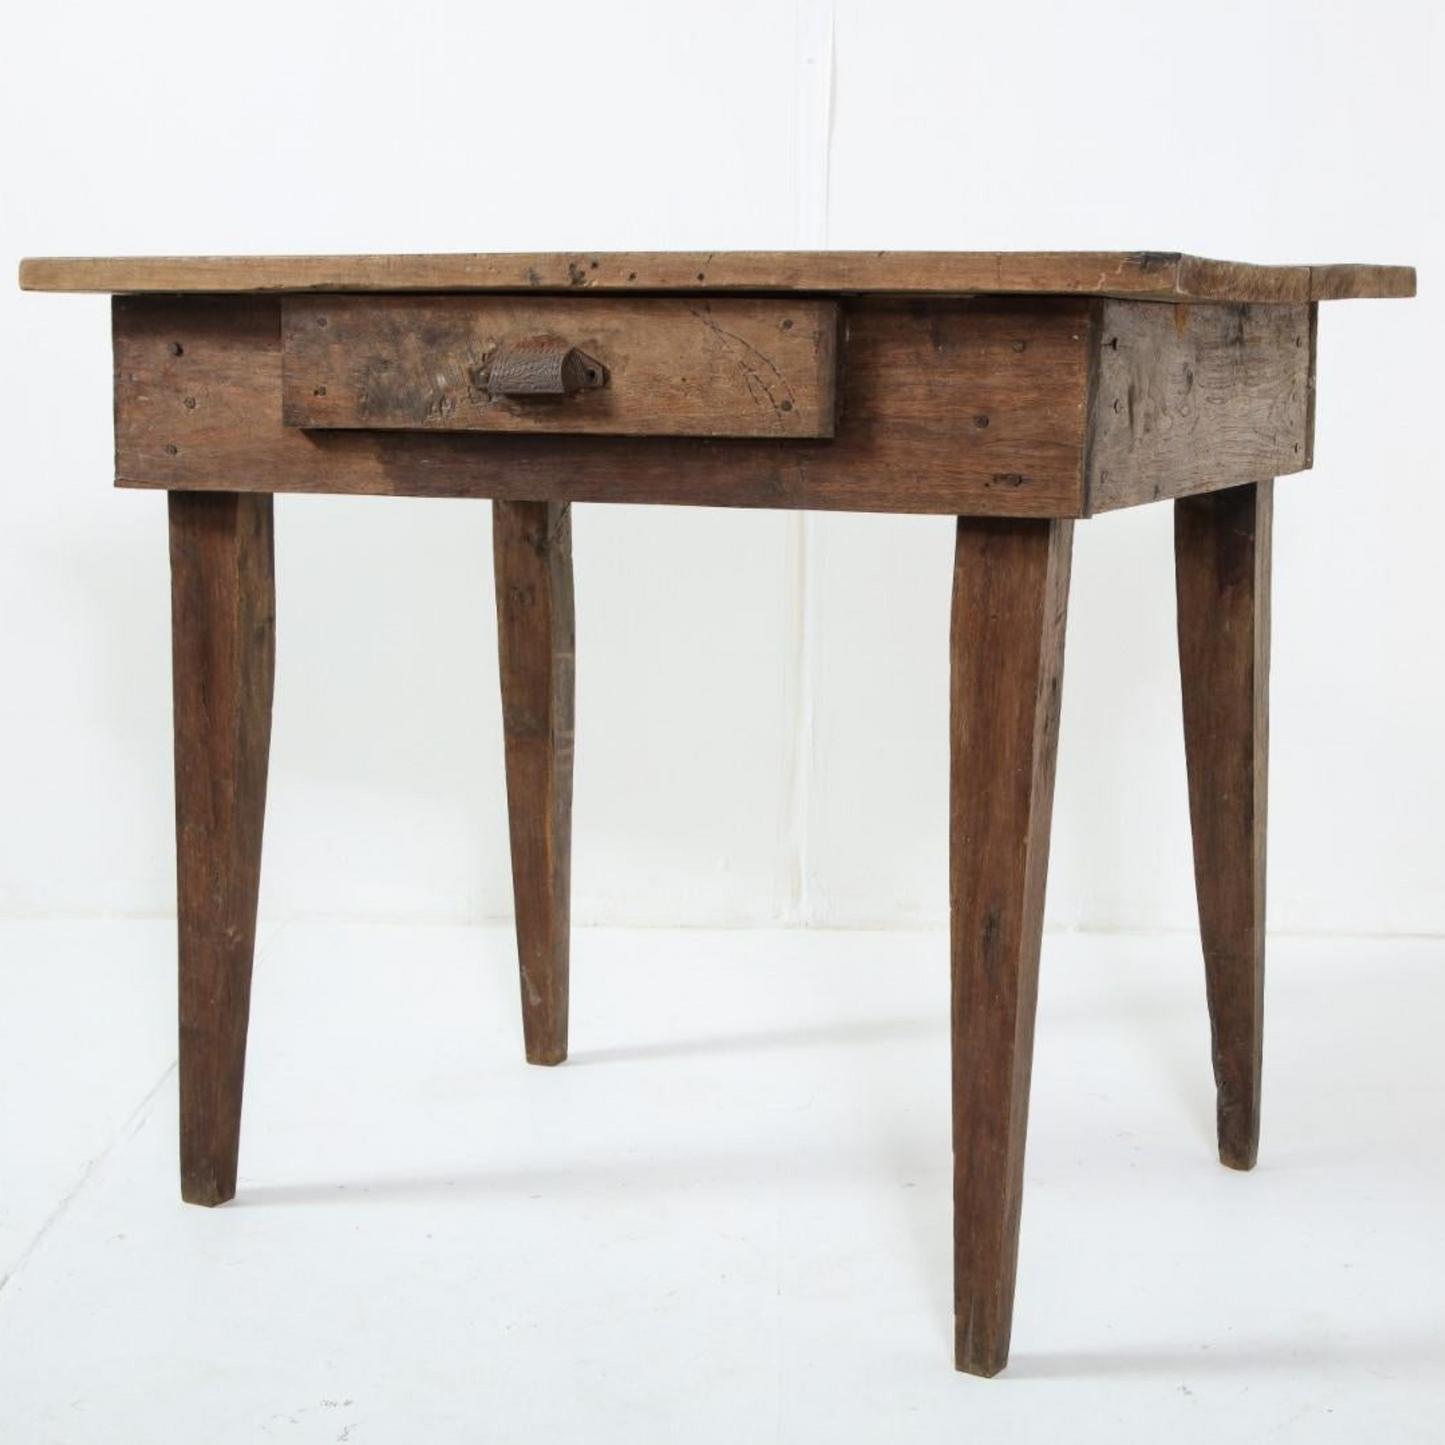 Late 19th C. Rustic Oak Side Table with Drawer